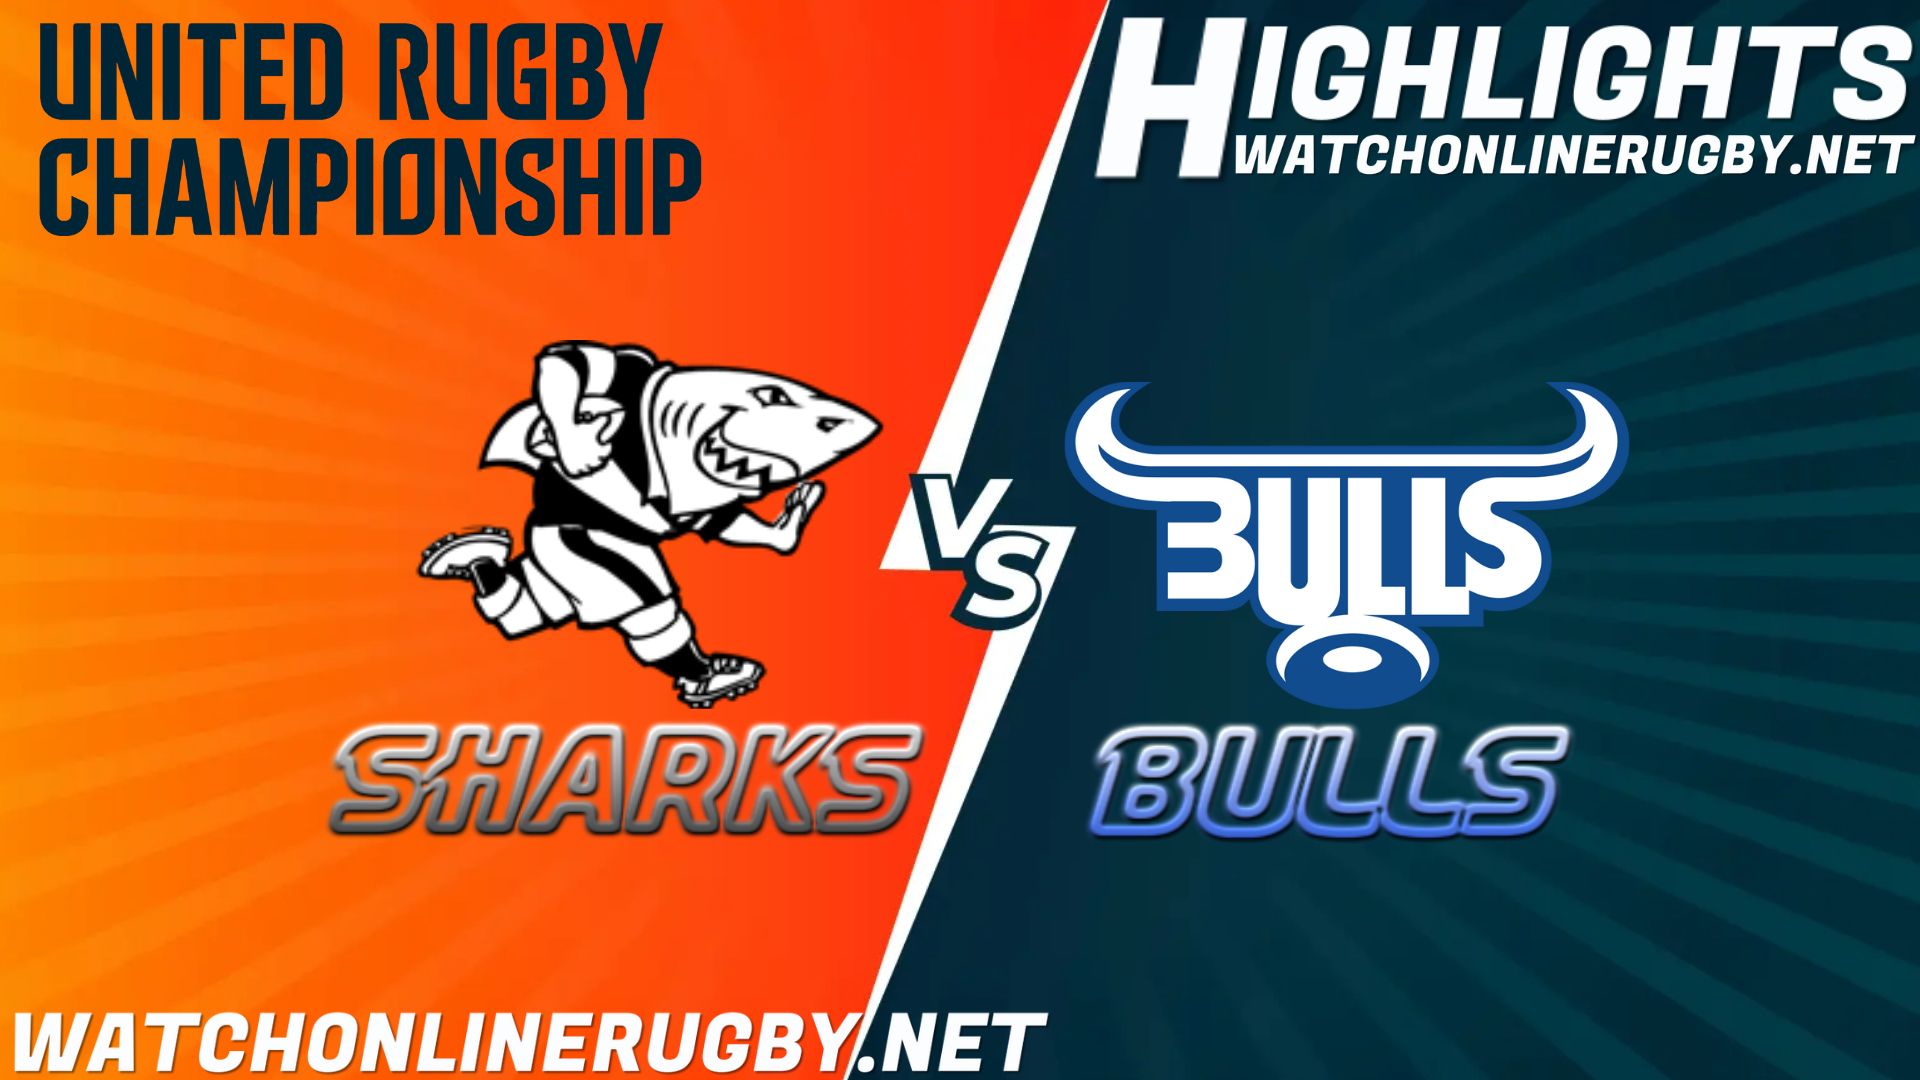 Sharks Vs Bulls Rugby United Rugby Championship 2021 RD 7